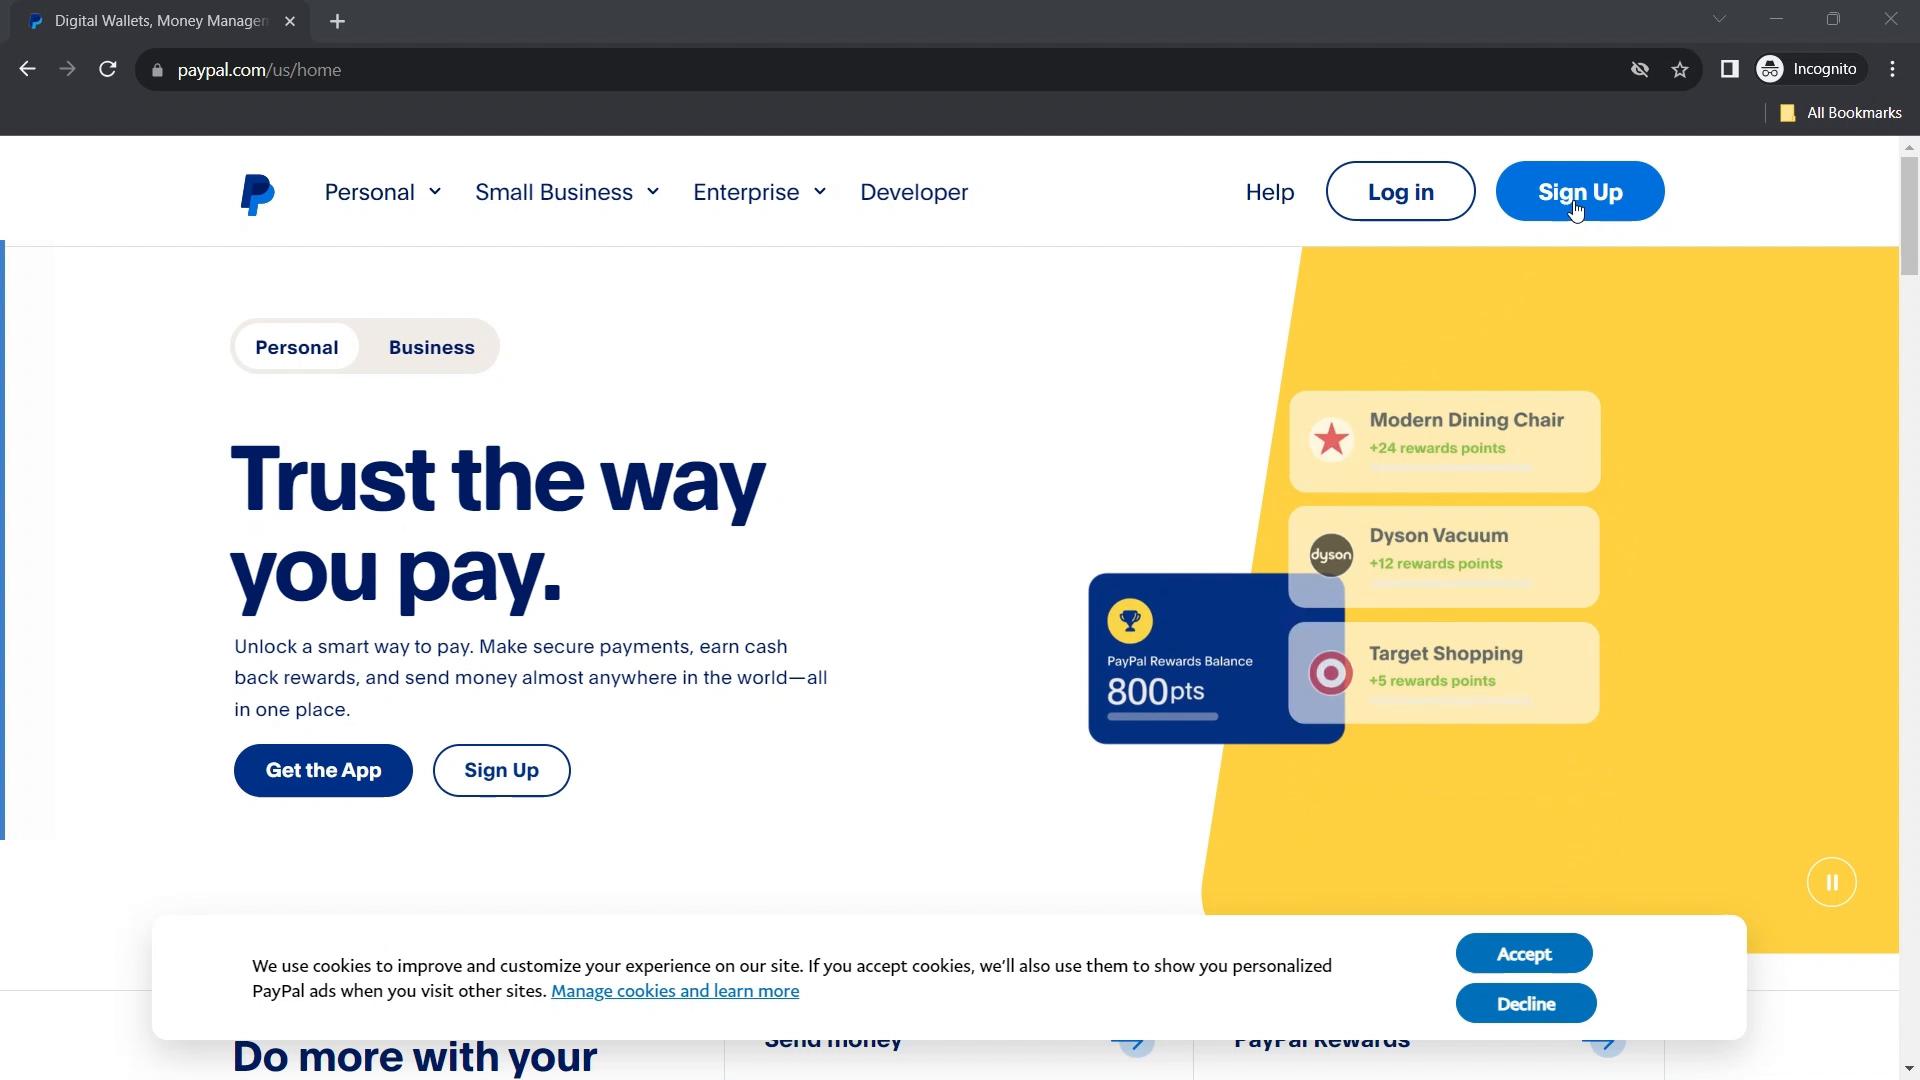 Screenshot of Onboarding on PayPal